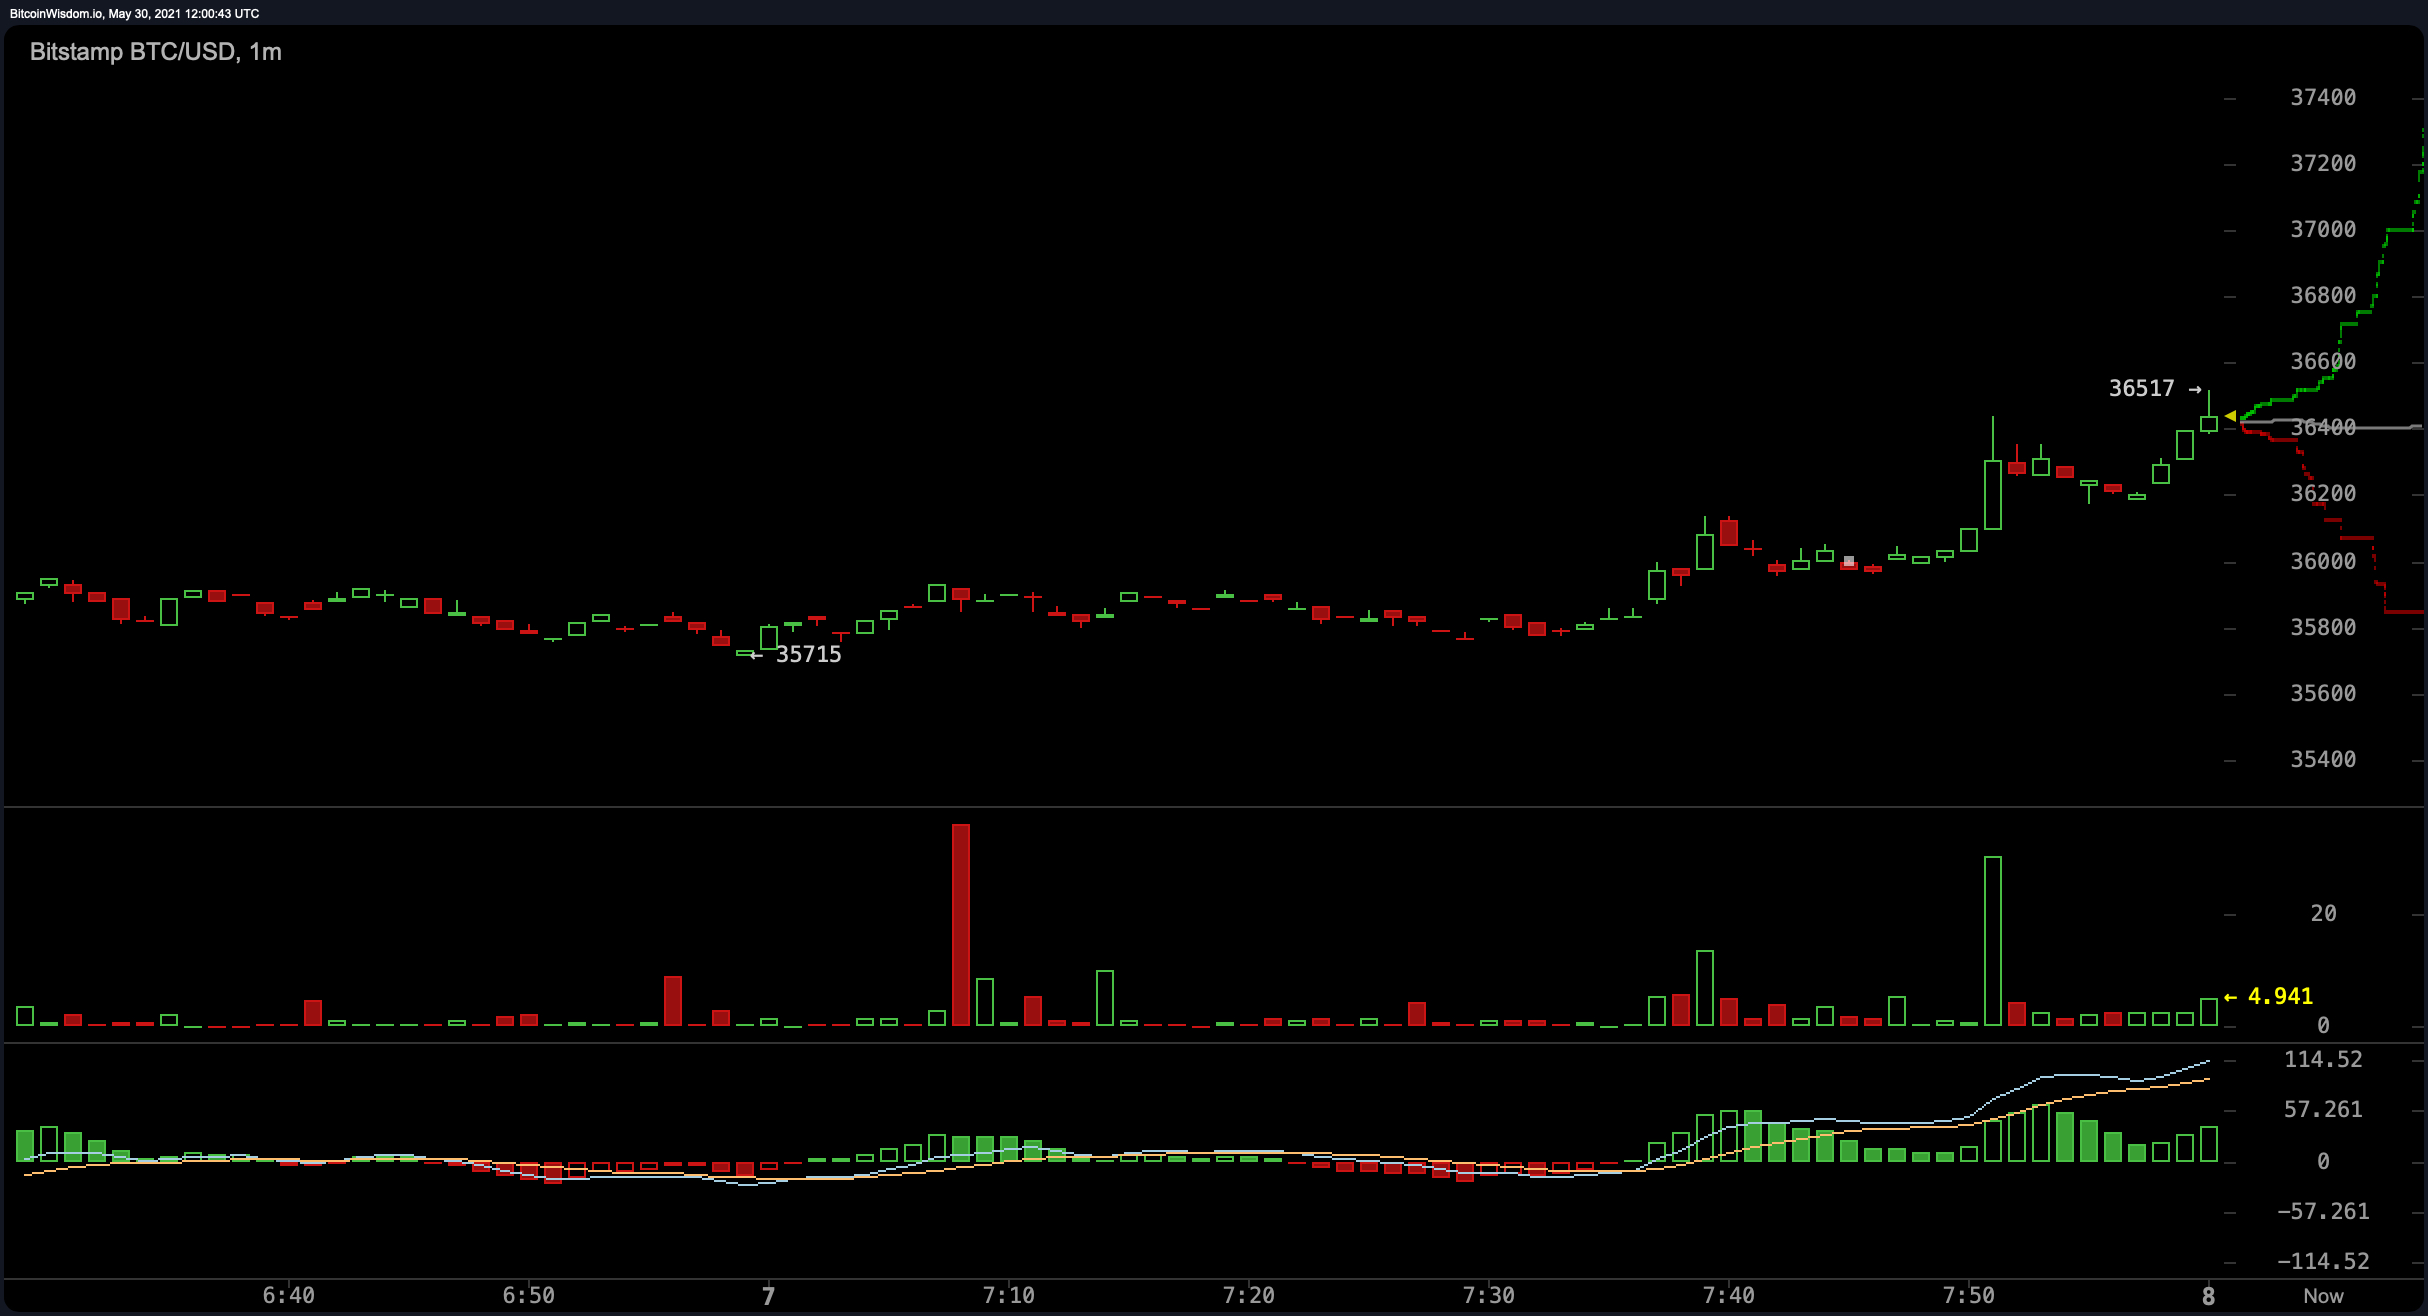 Bitcoin price chart all time usd